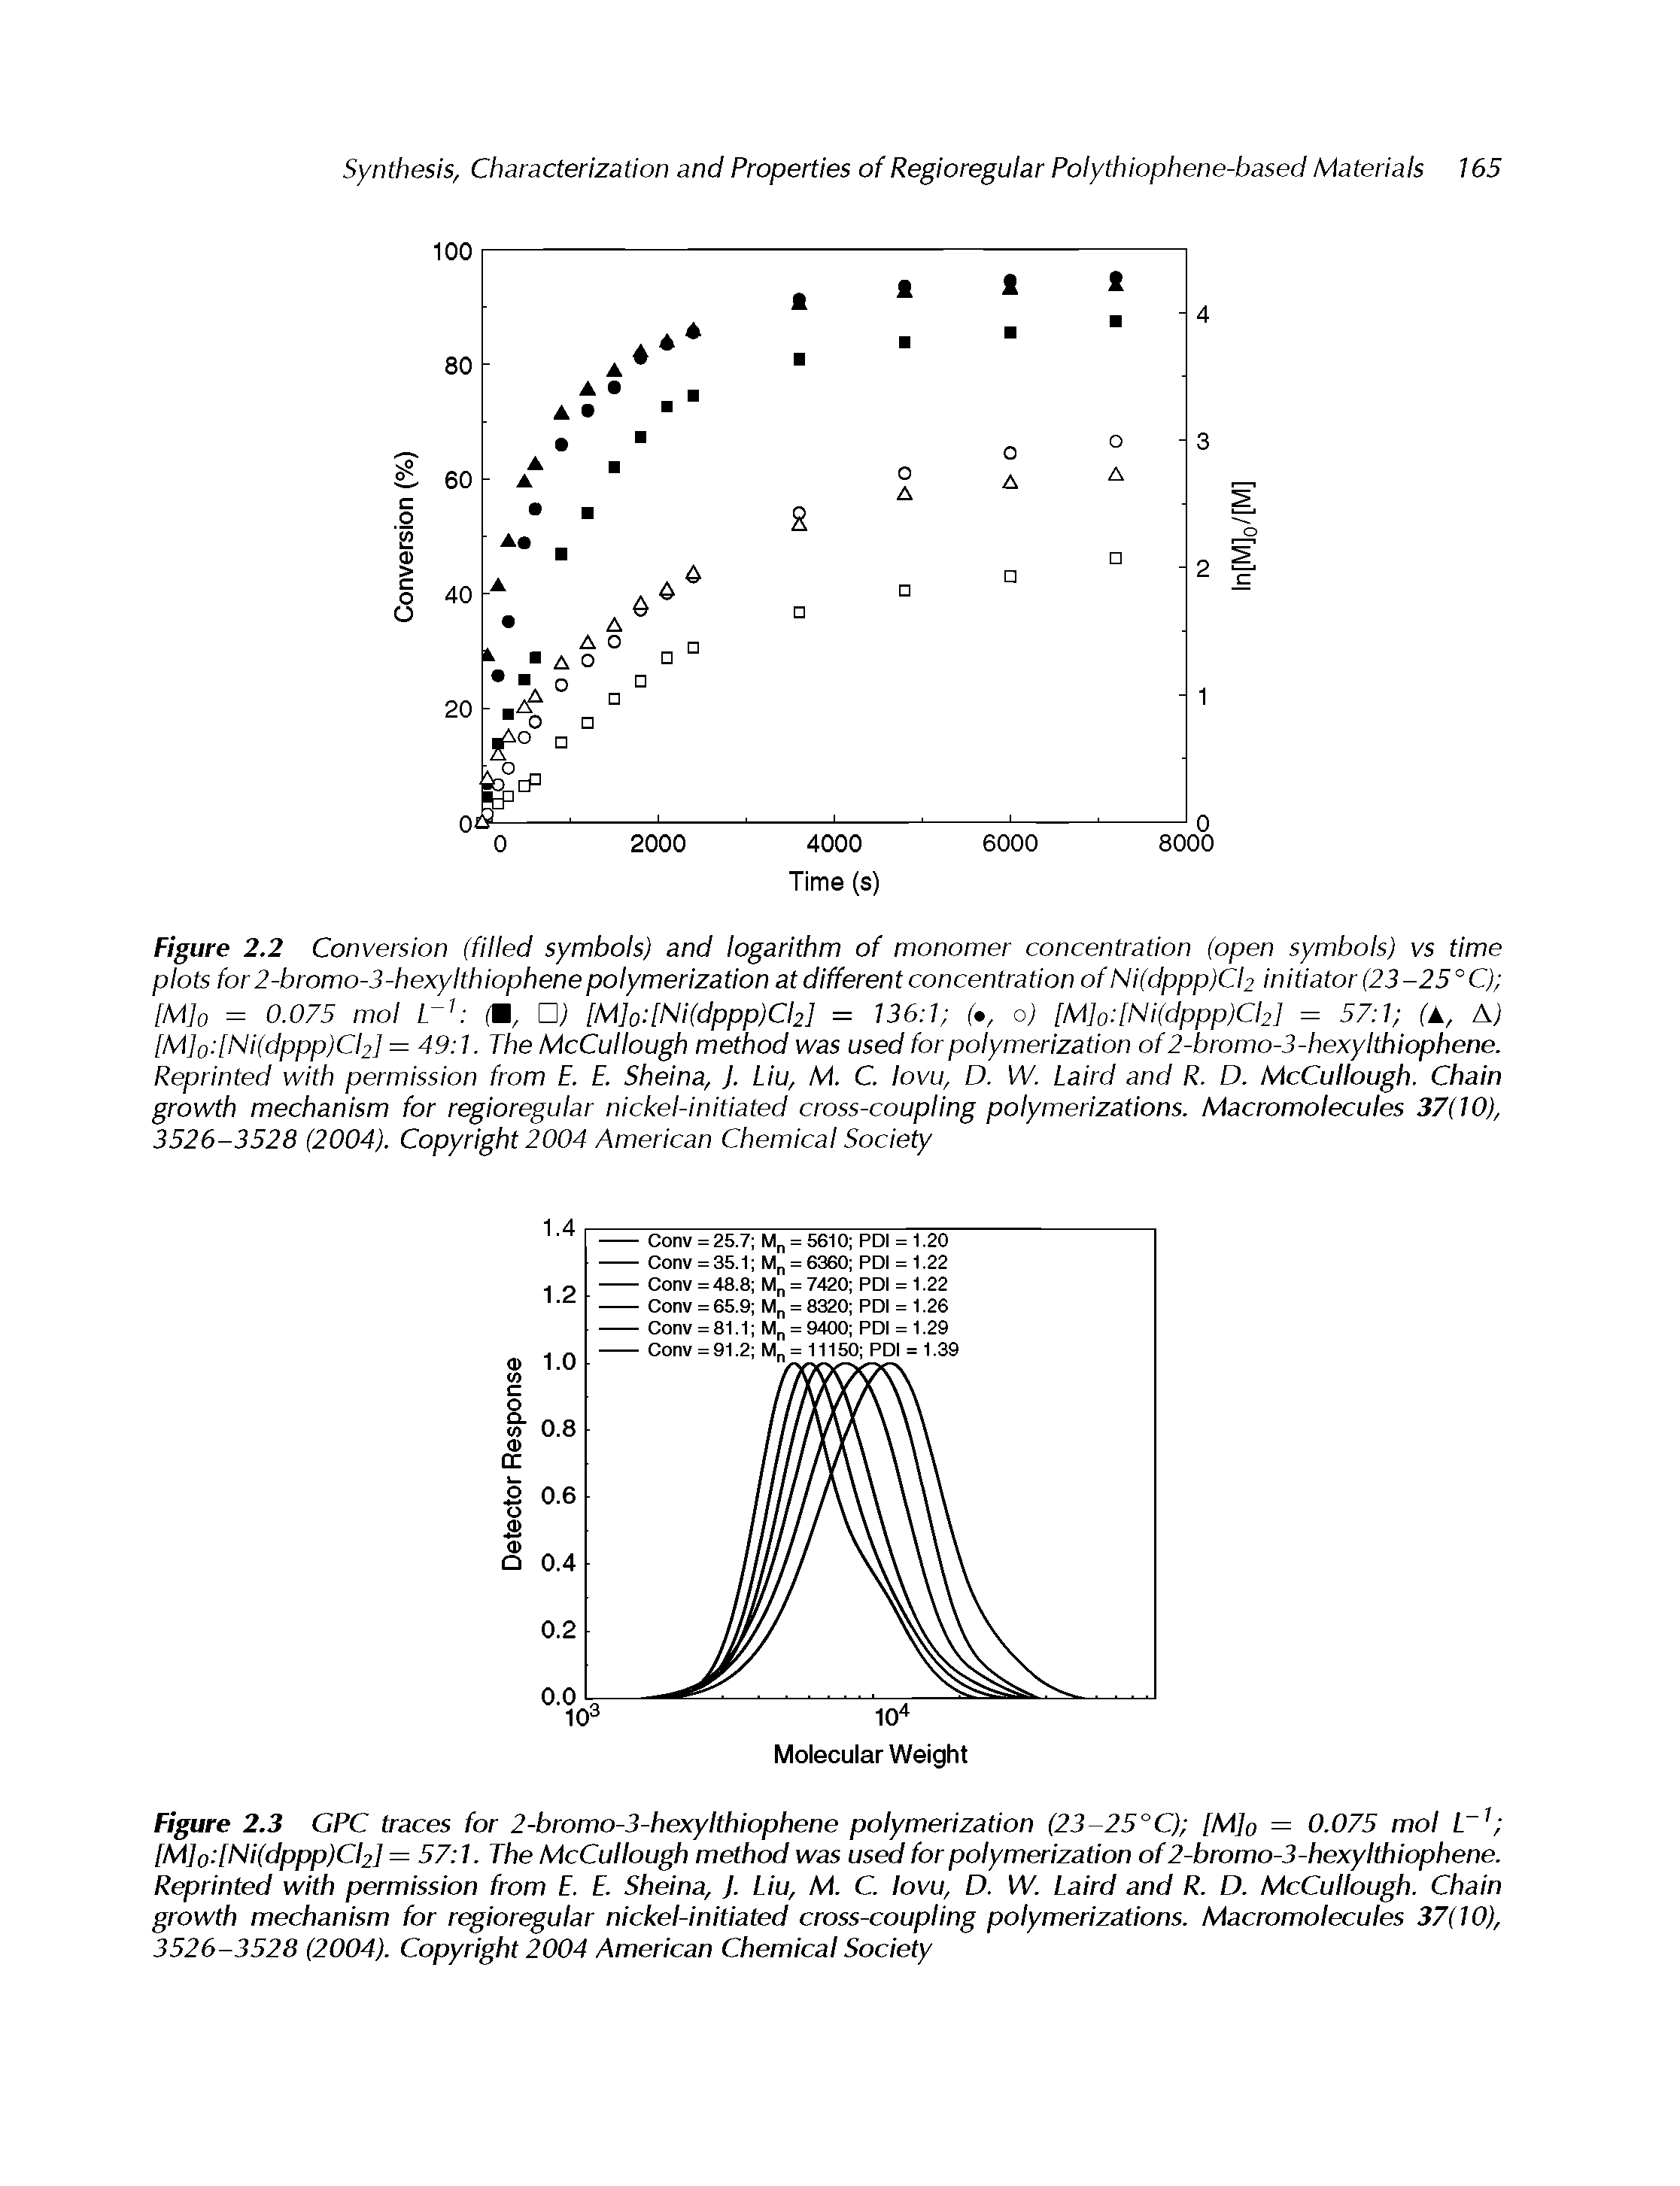 Figure 2.2 Conversion (filled symbols) and logarithm of monomer concentration (open symbols) vs time plots for 2-bromo-3-hexylthiophenepolymerization at different concentration ofNi(dppp)Cl2 initiator (23-25°C) [M]o = 0.075 mol L (M, [M]o [Ni(dppp)Cl2] = 136 1 ( , o) [M]o [Ni(dppp)Cl2] = 57 1 (A, A) [M]o [Ni(dppp)Cl2] = 49 1. The McCullough method was used for polymerization of2-bromo-3-hexylthiophene. Reprinted with permission from E. E. Sheina, J. Liu, M. C. lovu, D. W. Laird and R. D. McCullough. Chain growth mechanism for regioregular nickel-initiated cross-coupling polymerizations. Macromolecules 37(10), 3526-3528 (2004). Copyright 2004 American Chemical Society...